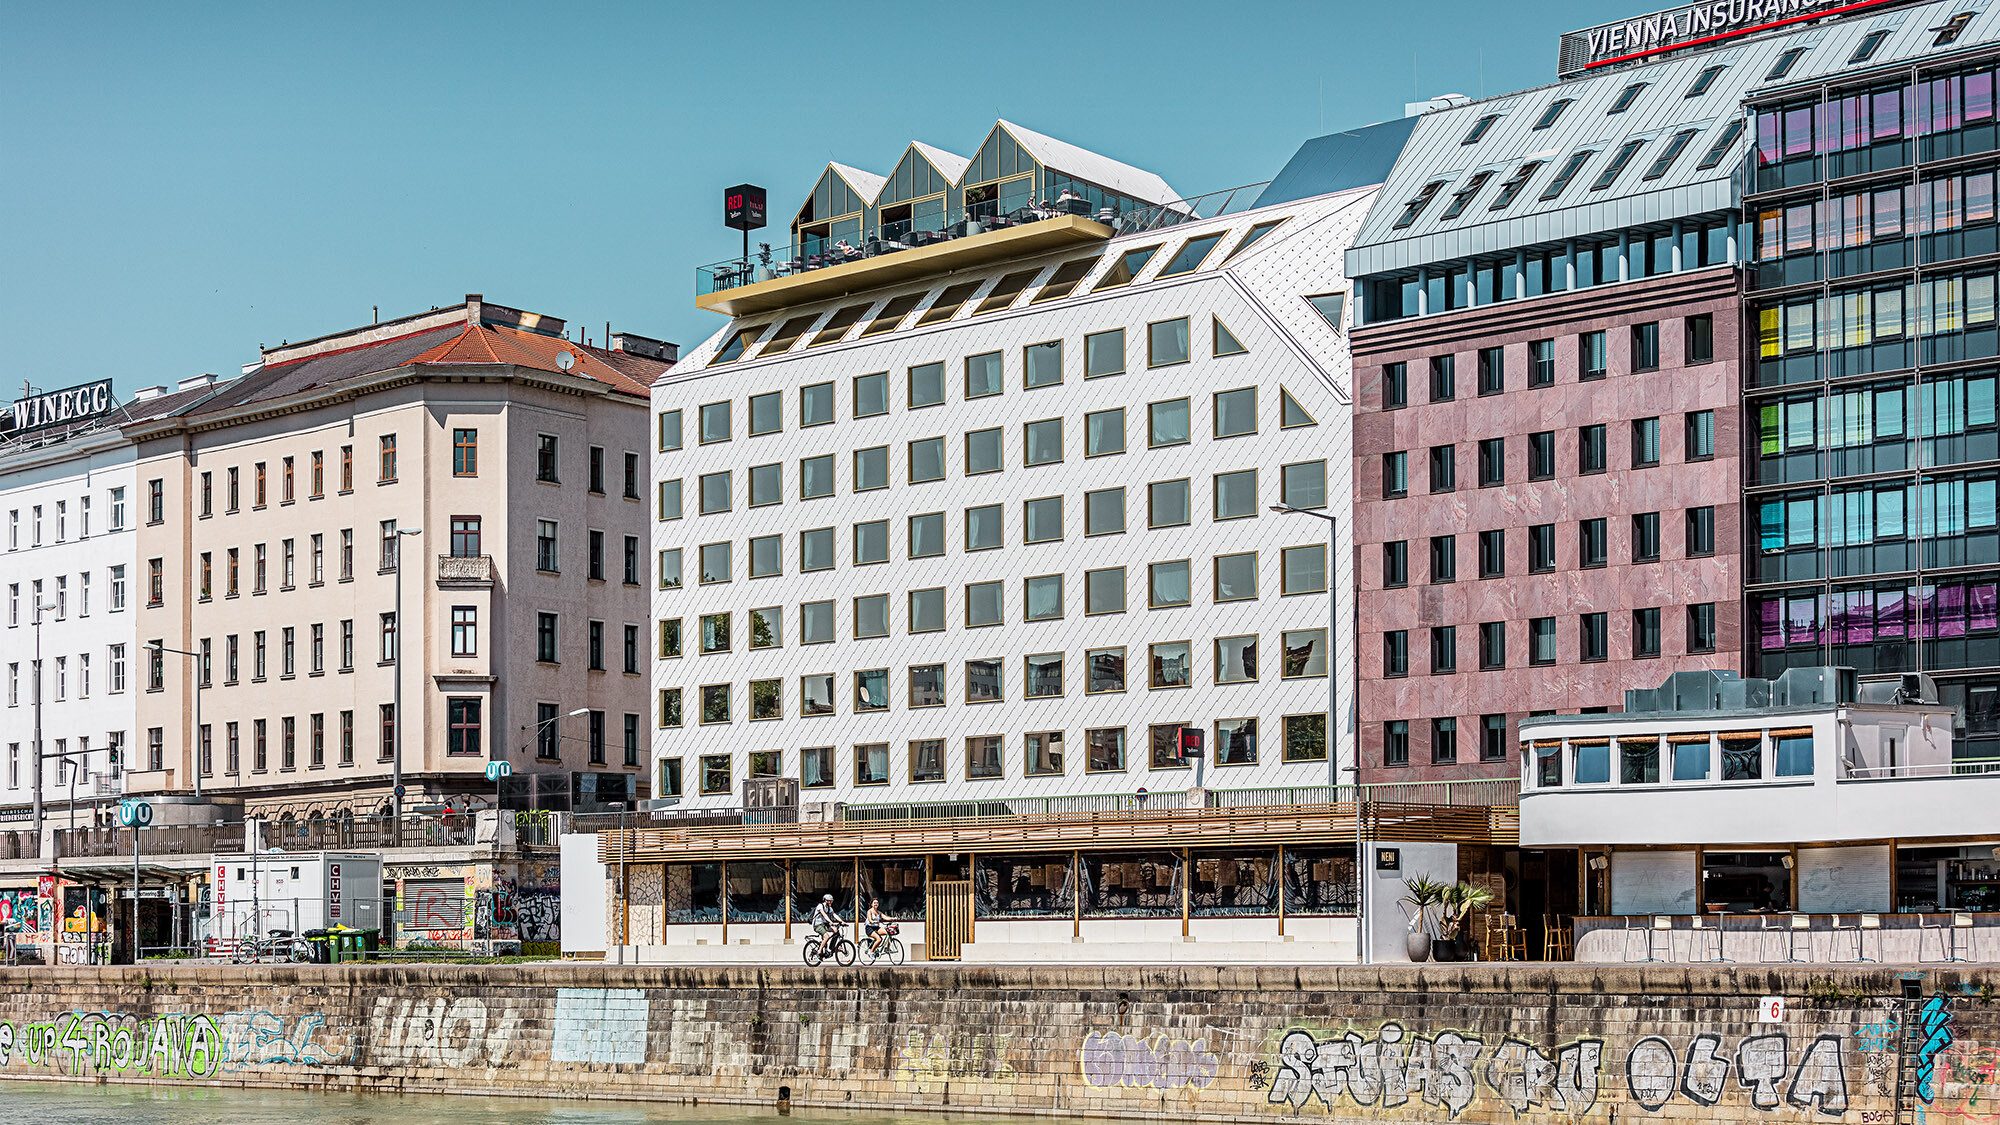 The hotel and its built environment from a side perspective, the Danube Canal extending right before it.